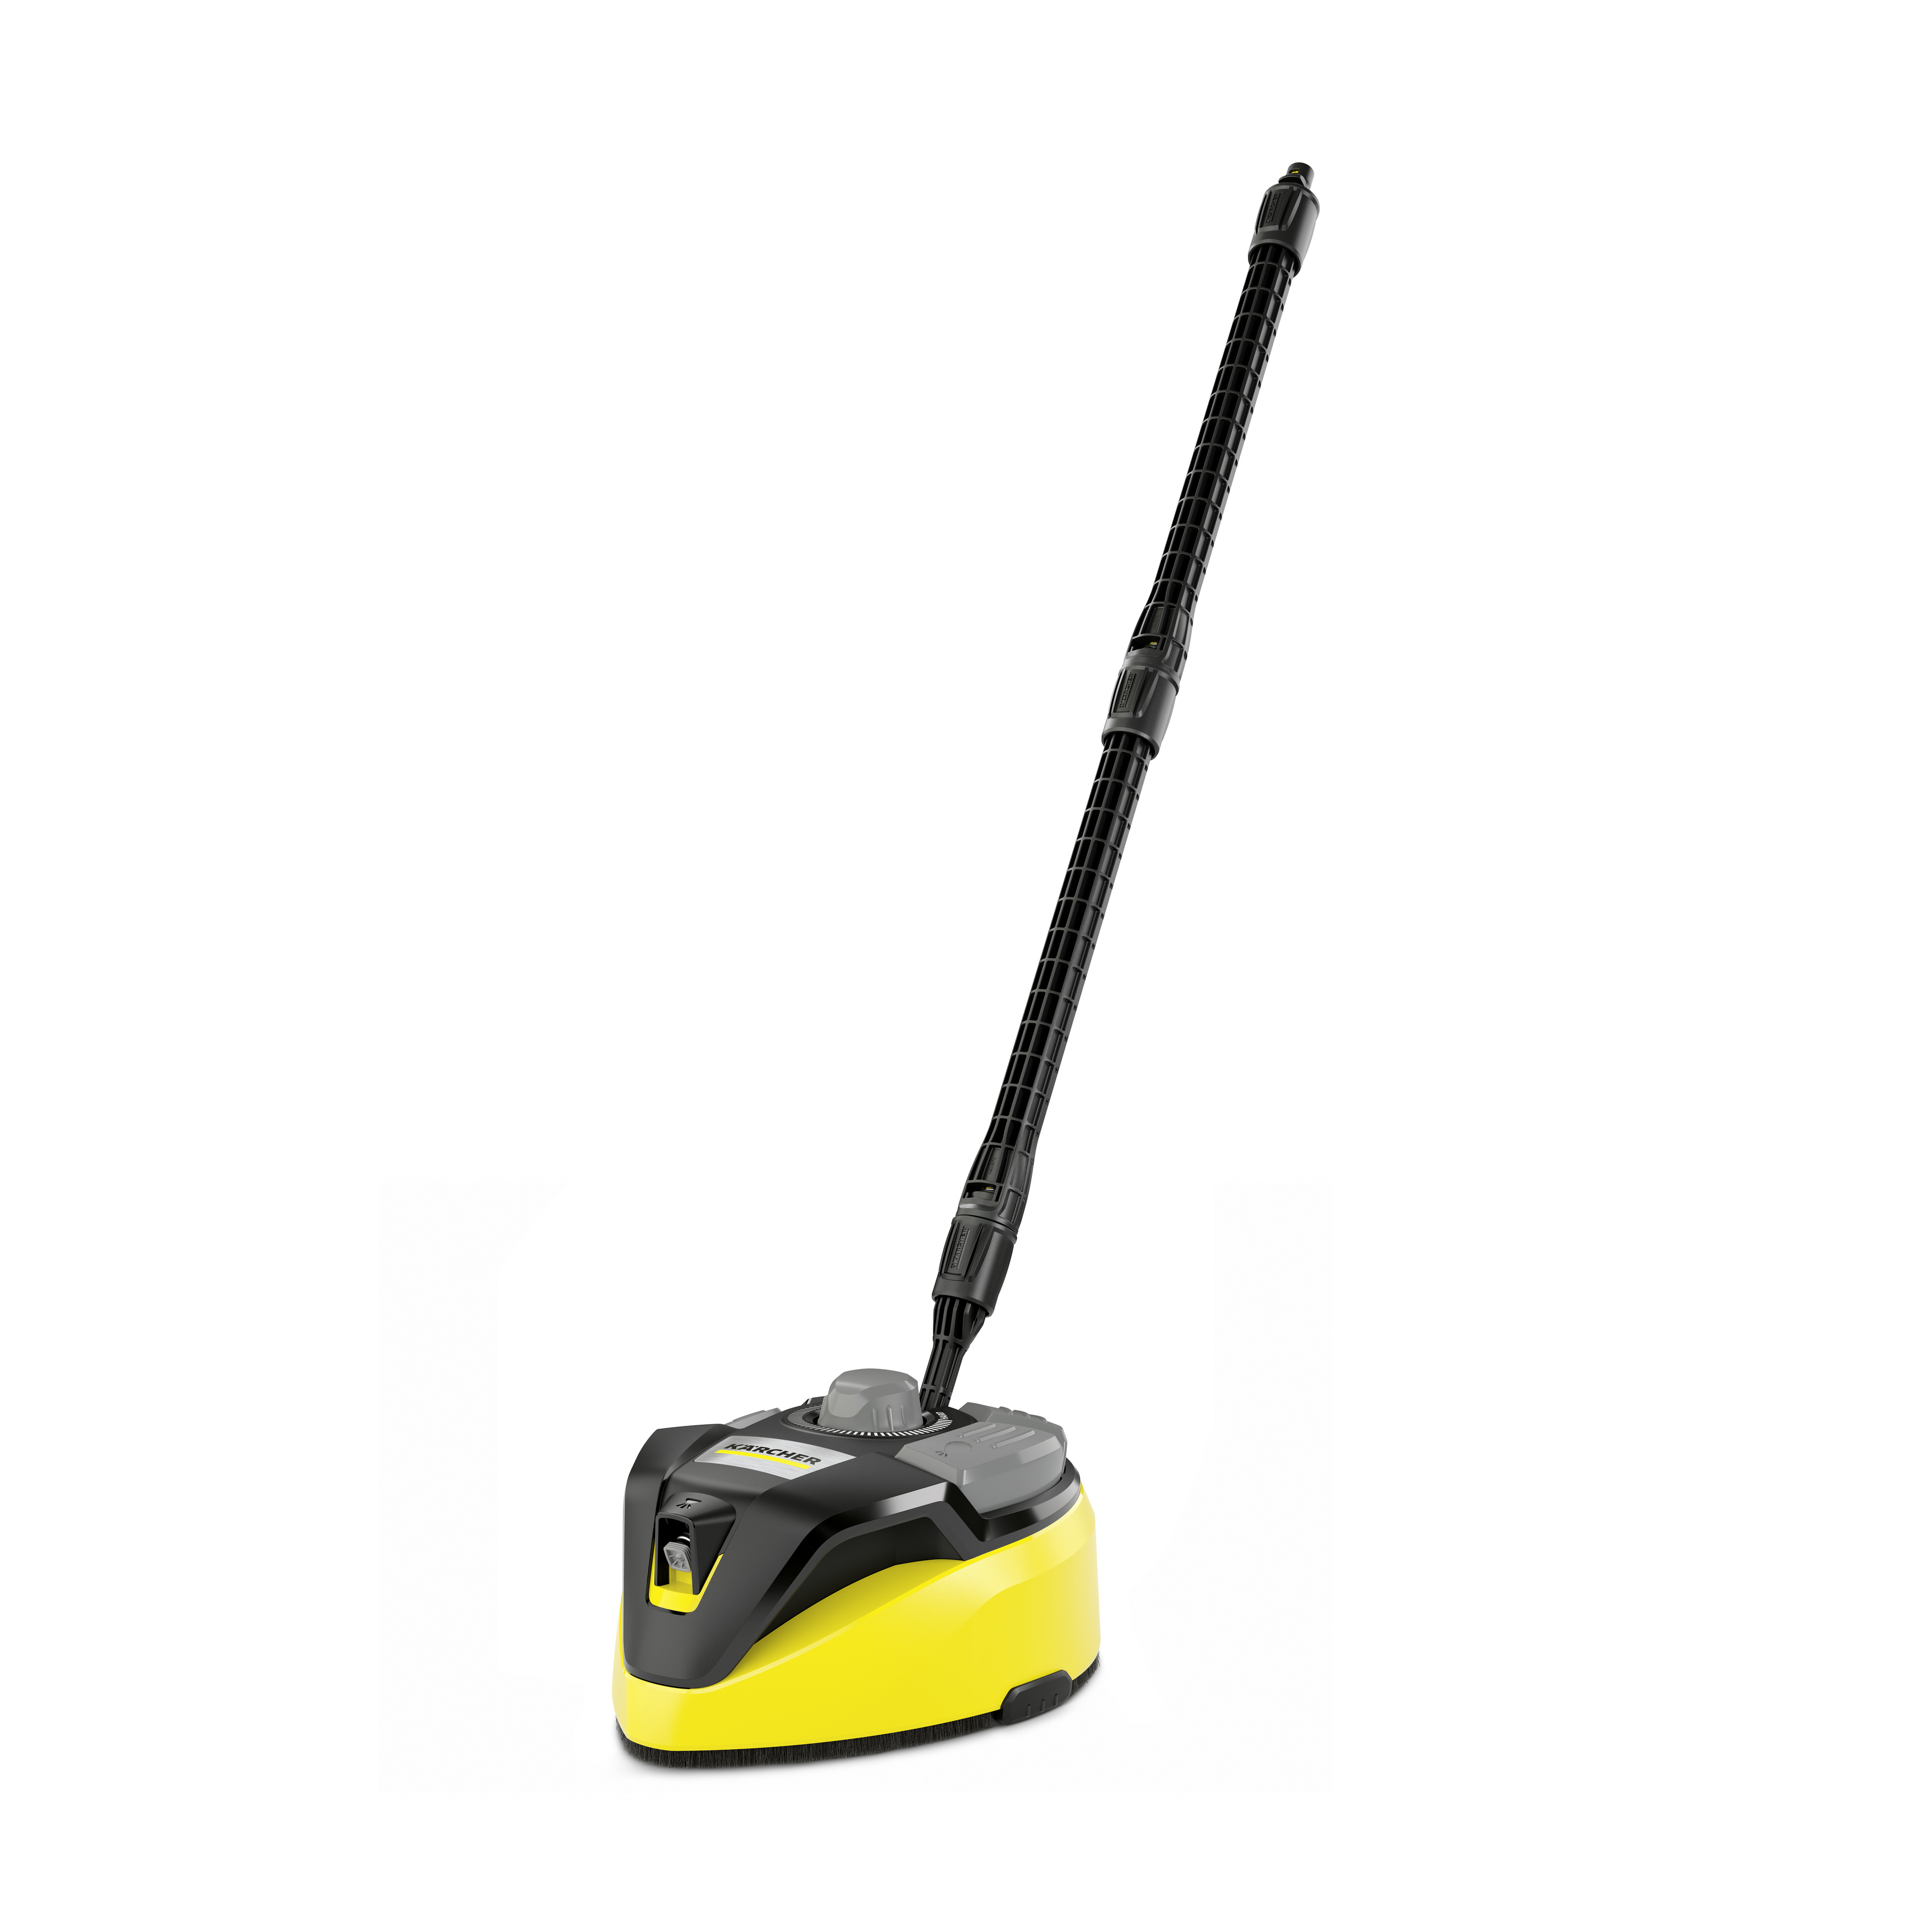 T 7 Plus T-Racer surface cleaner - 2